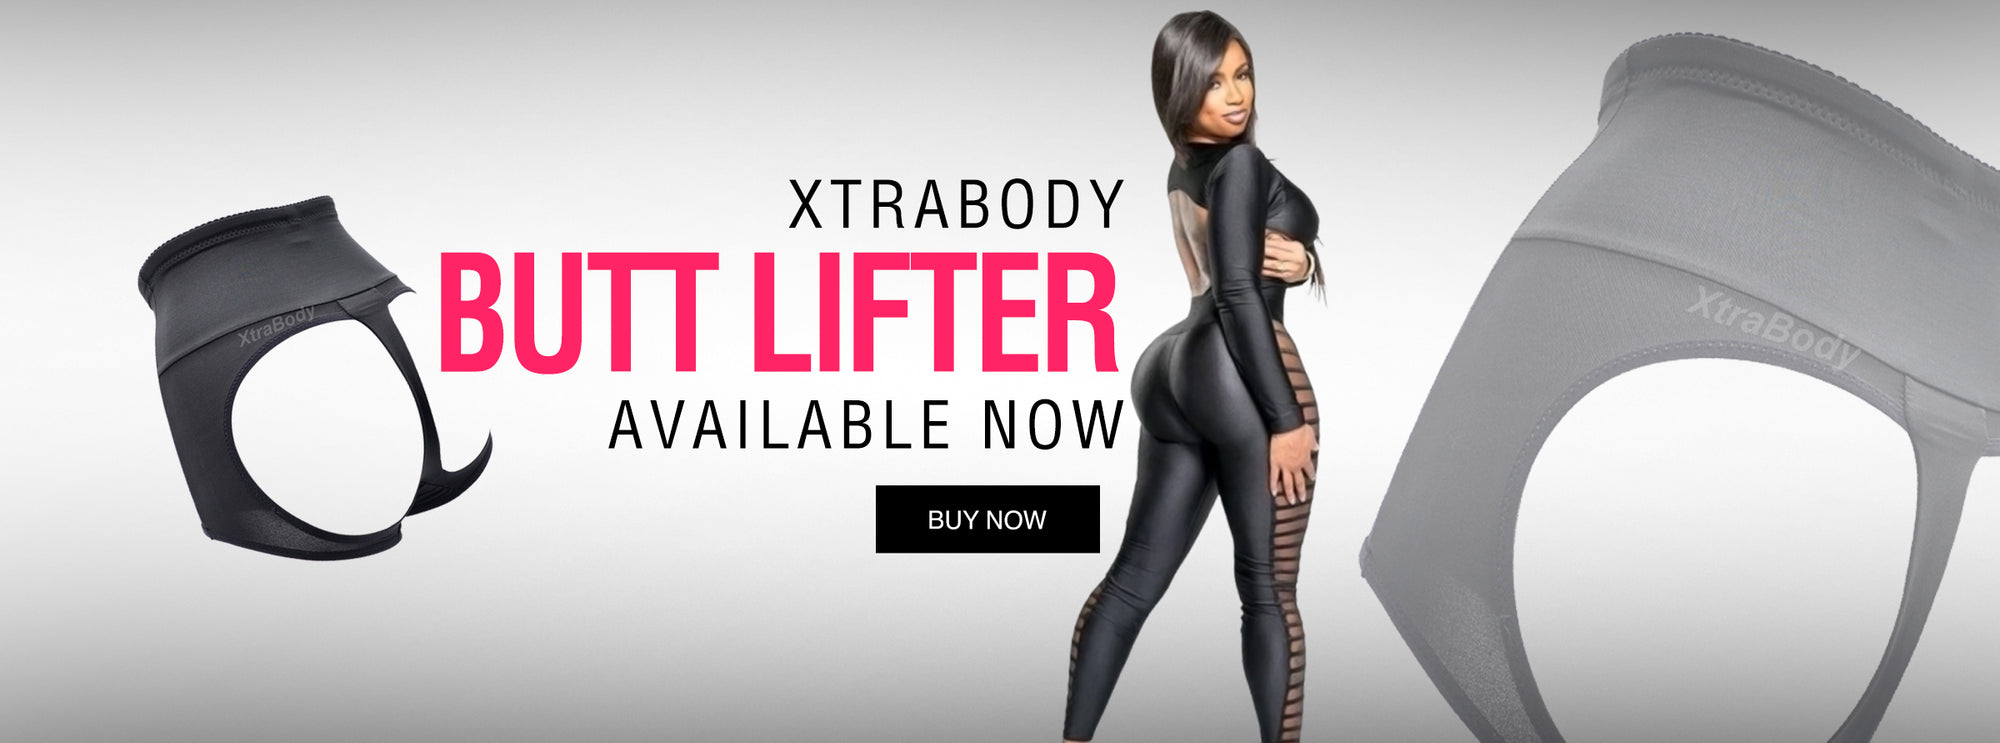 XtraBody Butt Lifter Available Now